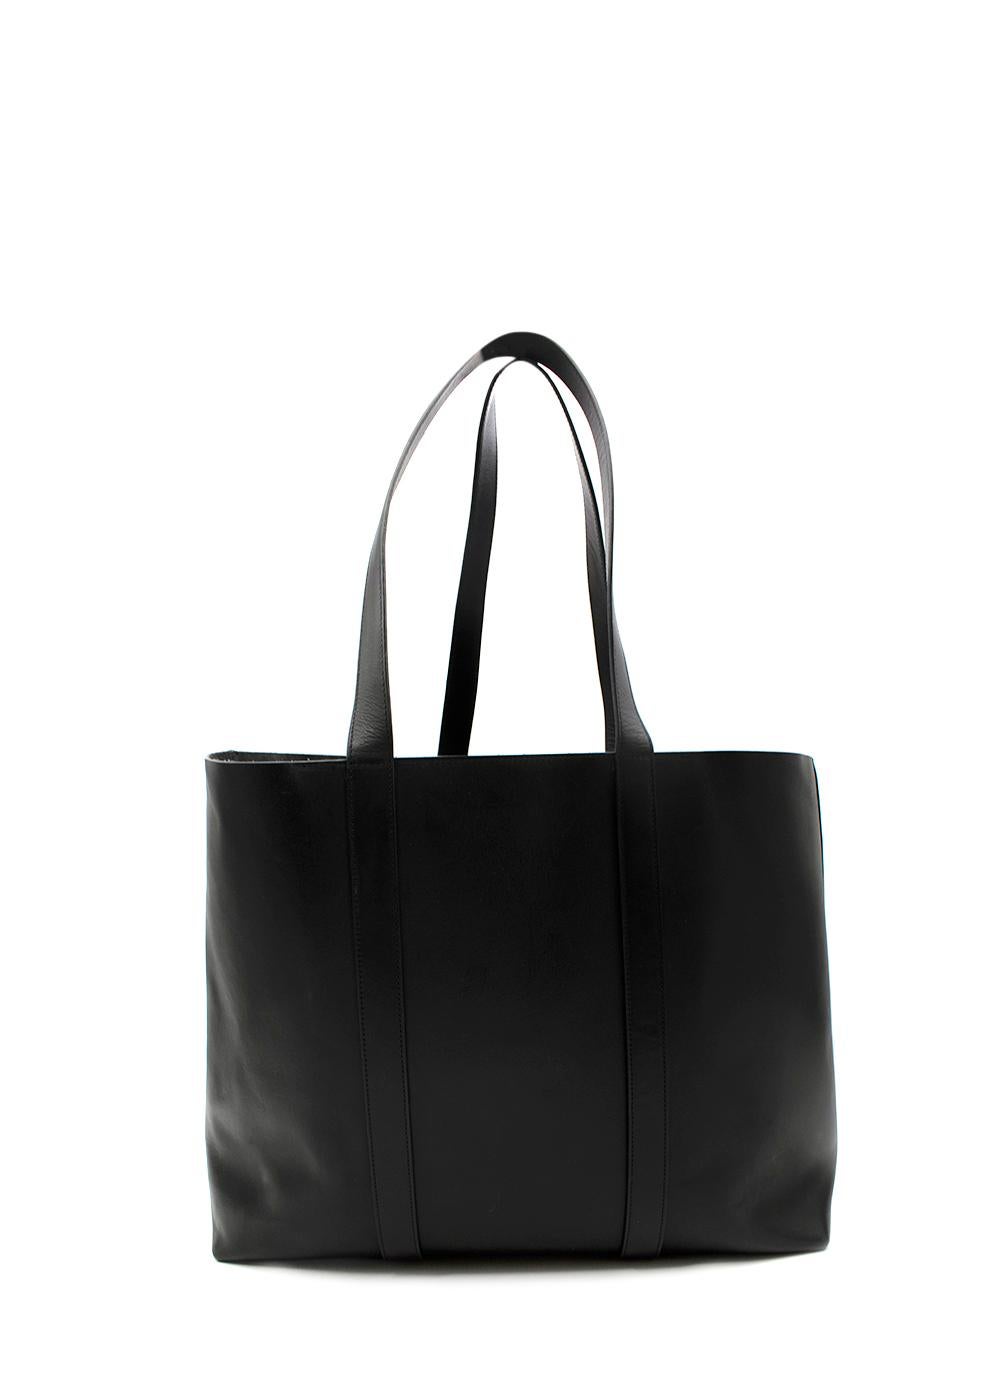 Mansur Gavriel Black Leather Tote Bag

- Clean and minimalist large spacious tote bag
- Two top handle and shoulder straps
- Charcoal grey suede interior with one large slip pocket 

Materials
Leather
Suede

Made In Italy

PLEASE NOTE, THESE ITEMS